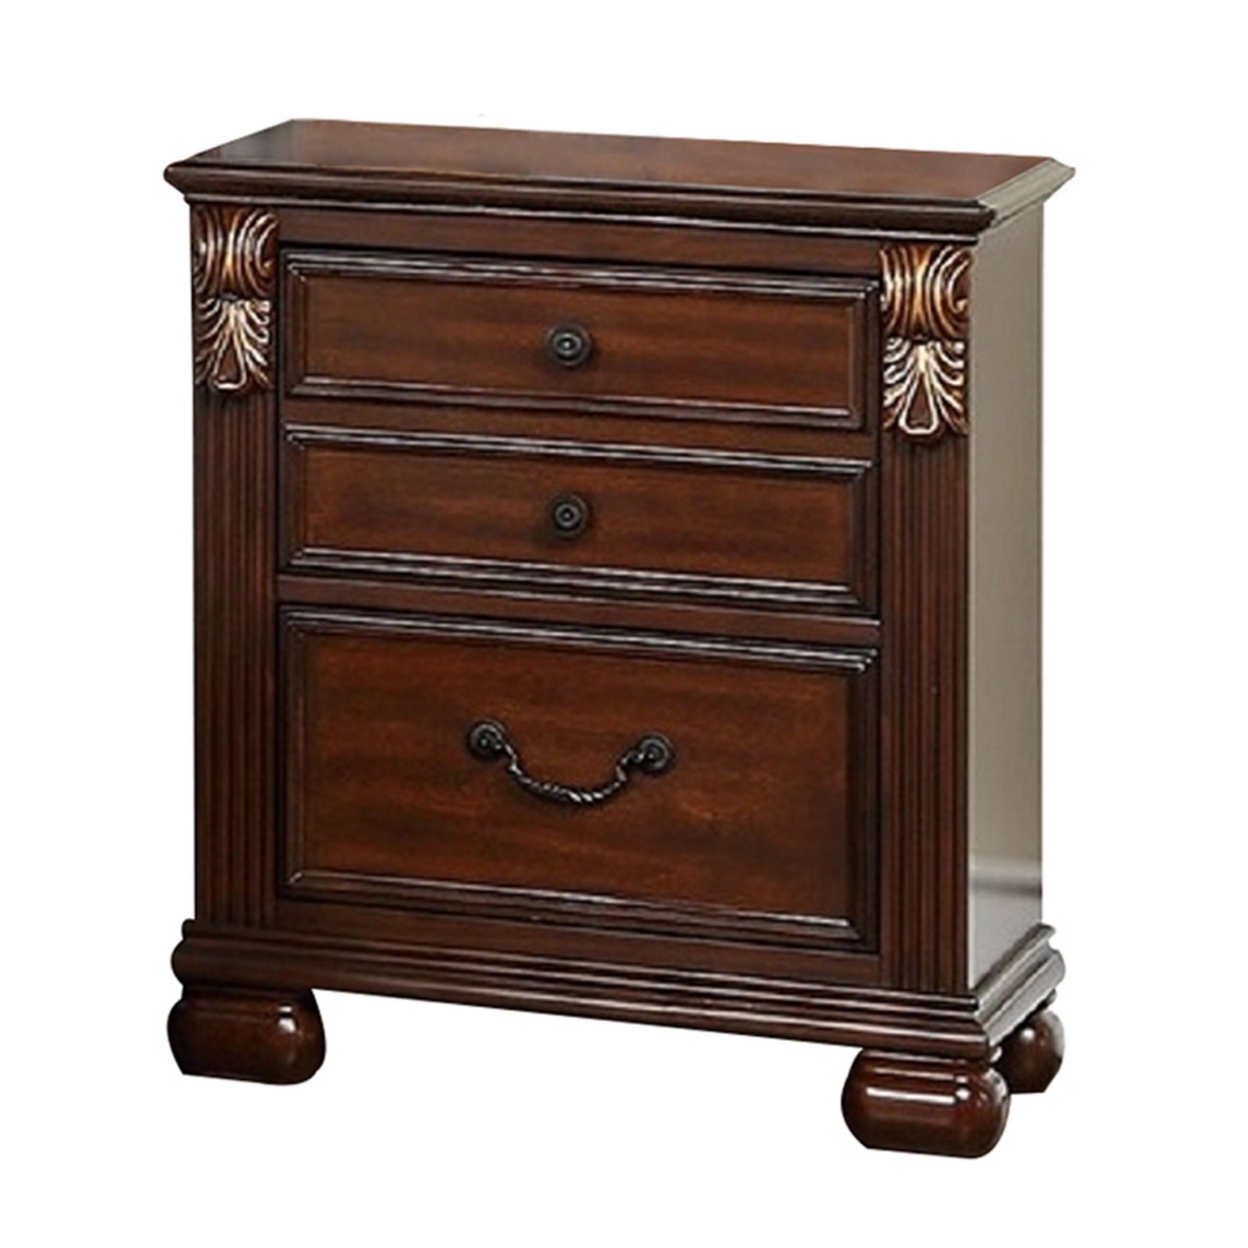 Miri 25 Inch 3 Drawer Nightstand, Brass Carved Accents, Cherry Oak Brown